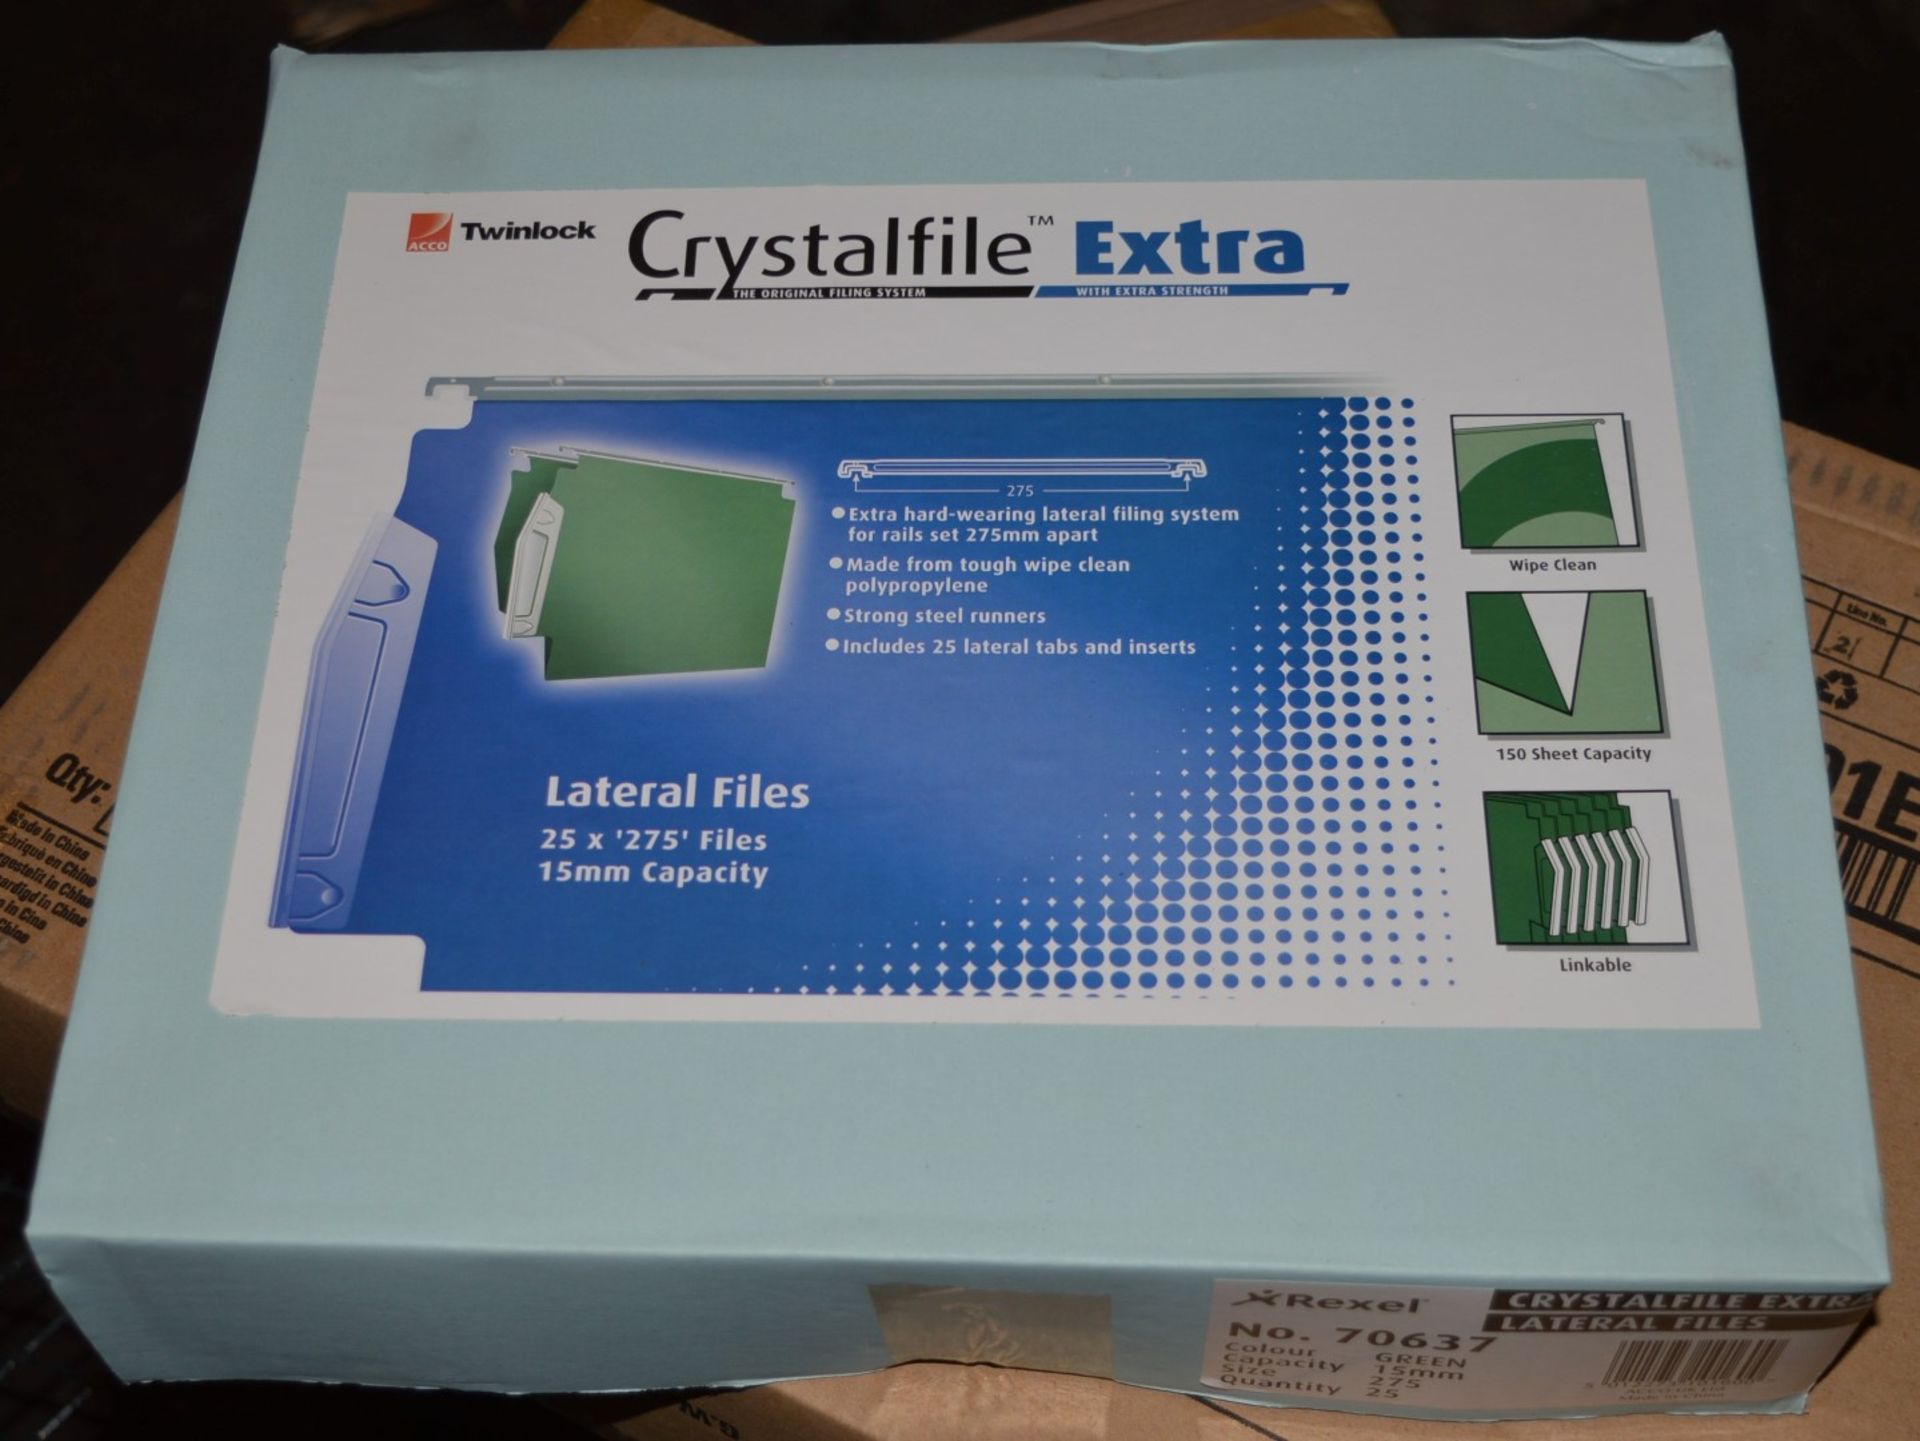 25 x Acco Twinlock Crystalfile Extra Foolscap Suspension Files - Green With 150 Sheet Capacity - - Image 2 of 5